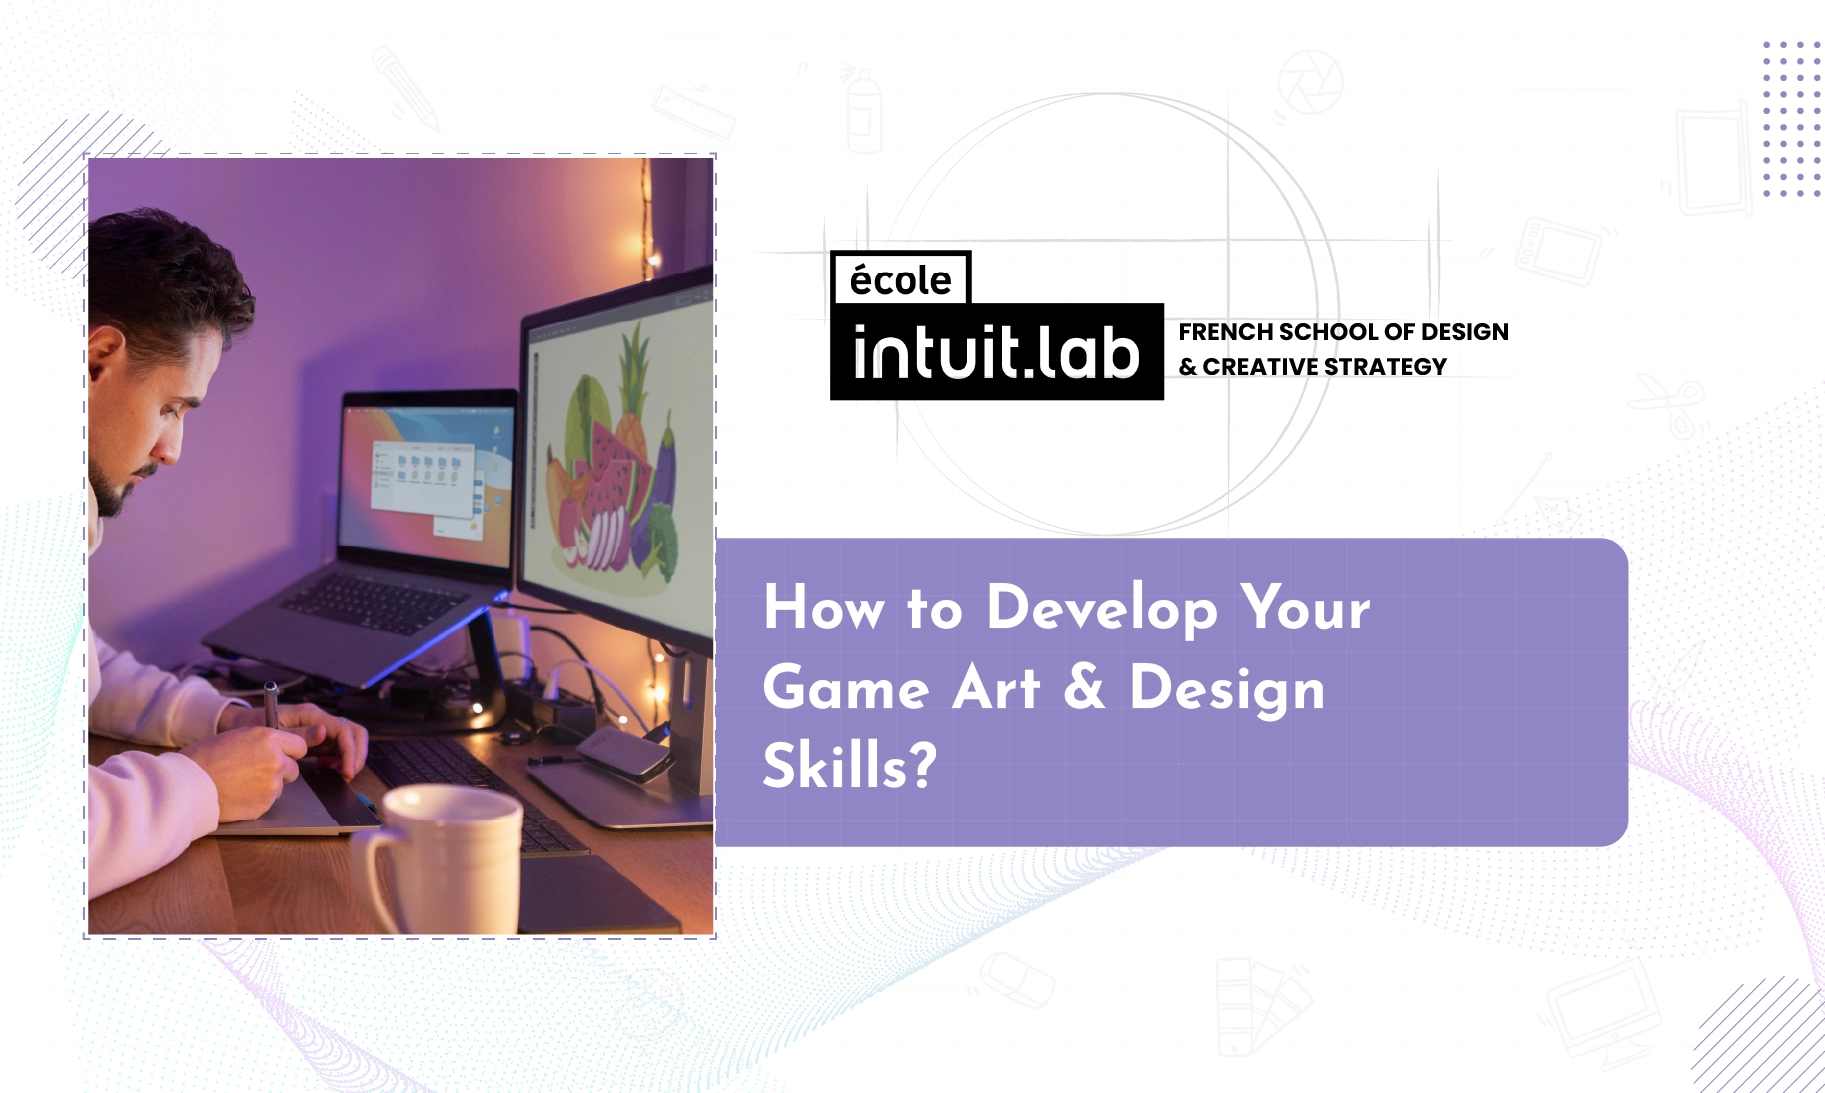 How to Develop Your Game Art & Design Skills?